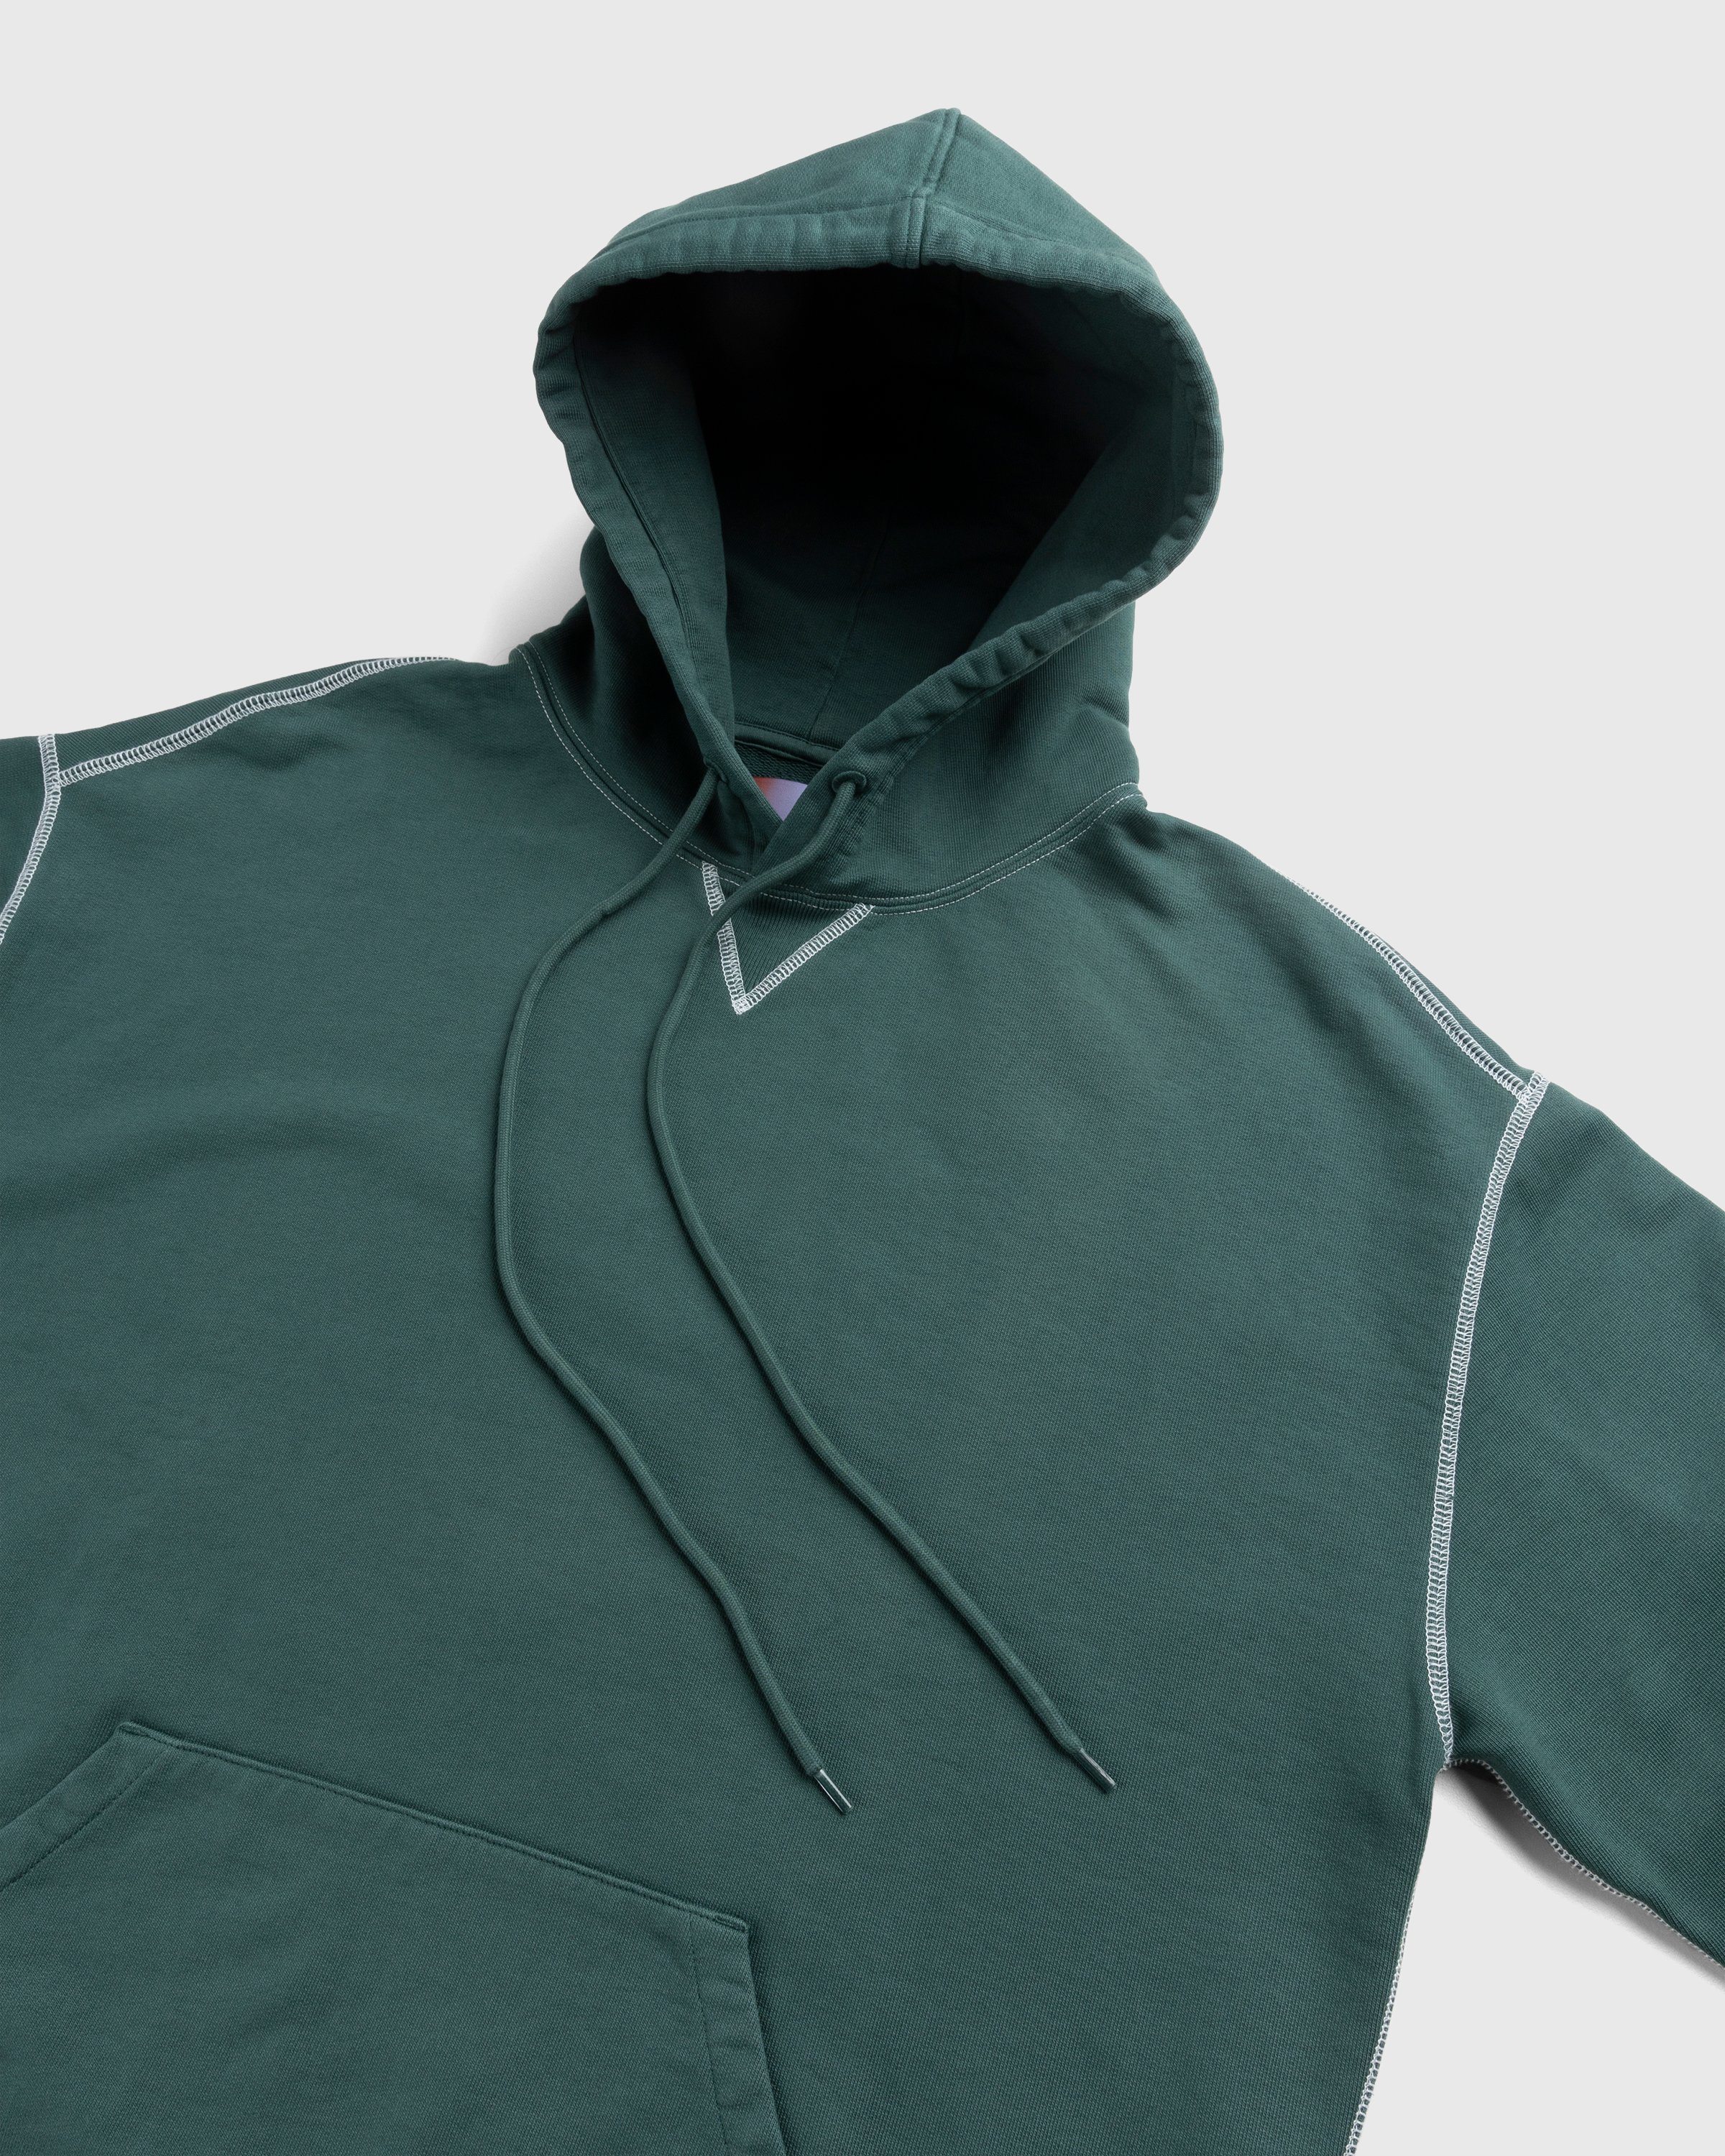 Highsnobiety - Garment Dyed Hoodie Green - Clothing - Green - Image 3